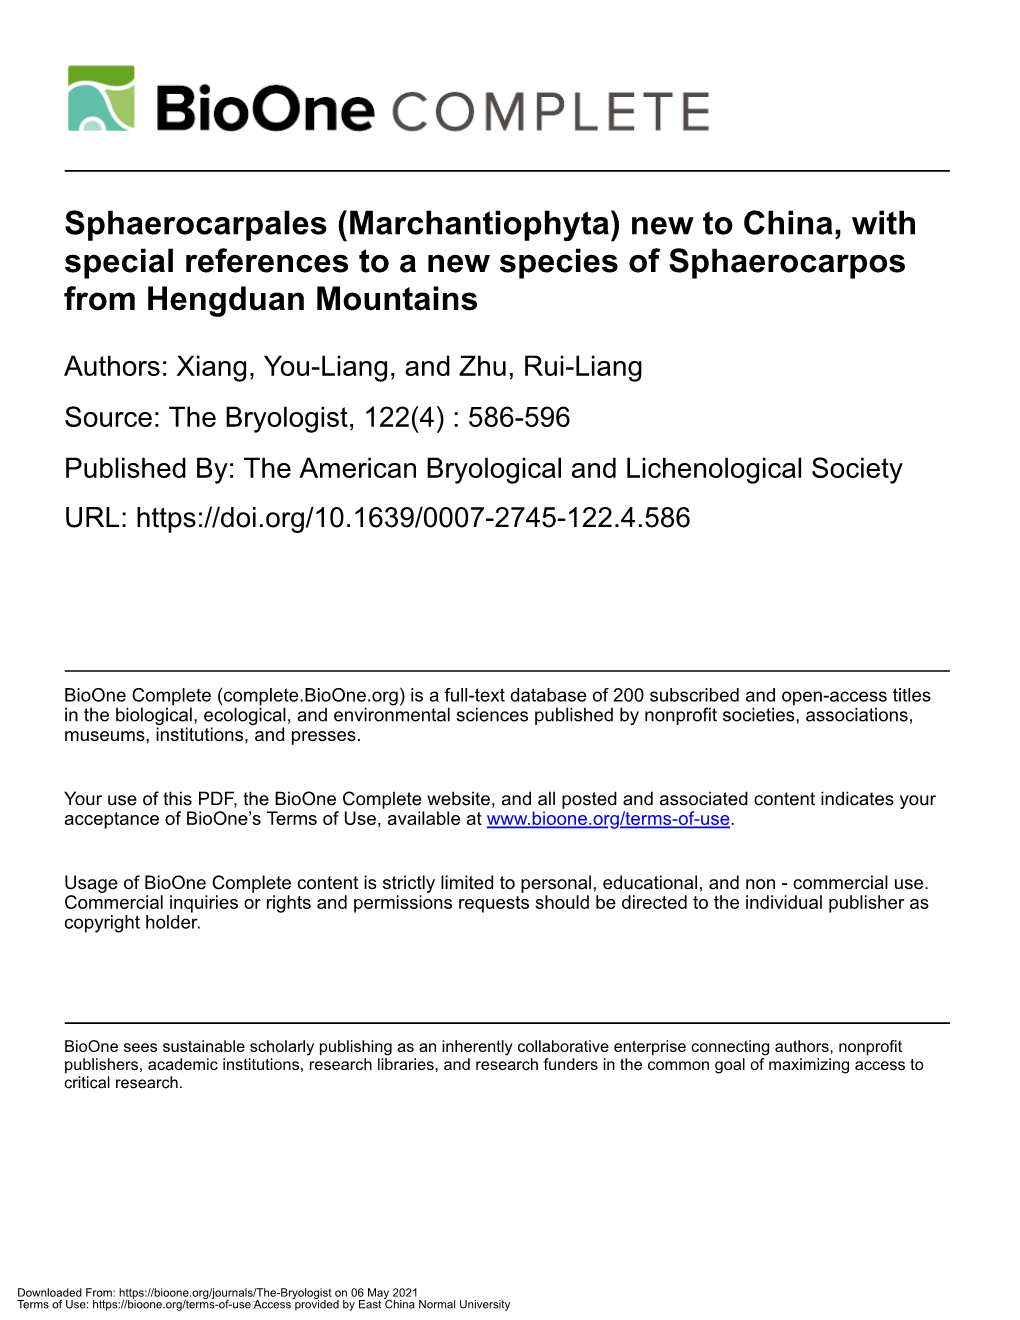 Sphaerocarpales (Marchantiophyta) New to China, with Special References to a New Species of Sphaerocarpos from Hengduan Mountains